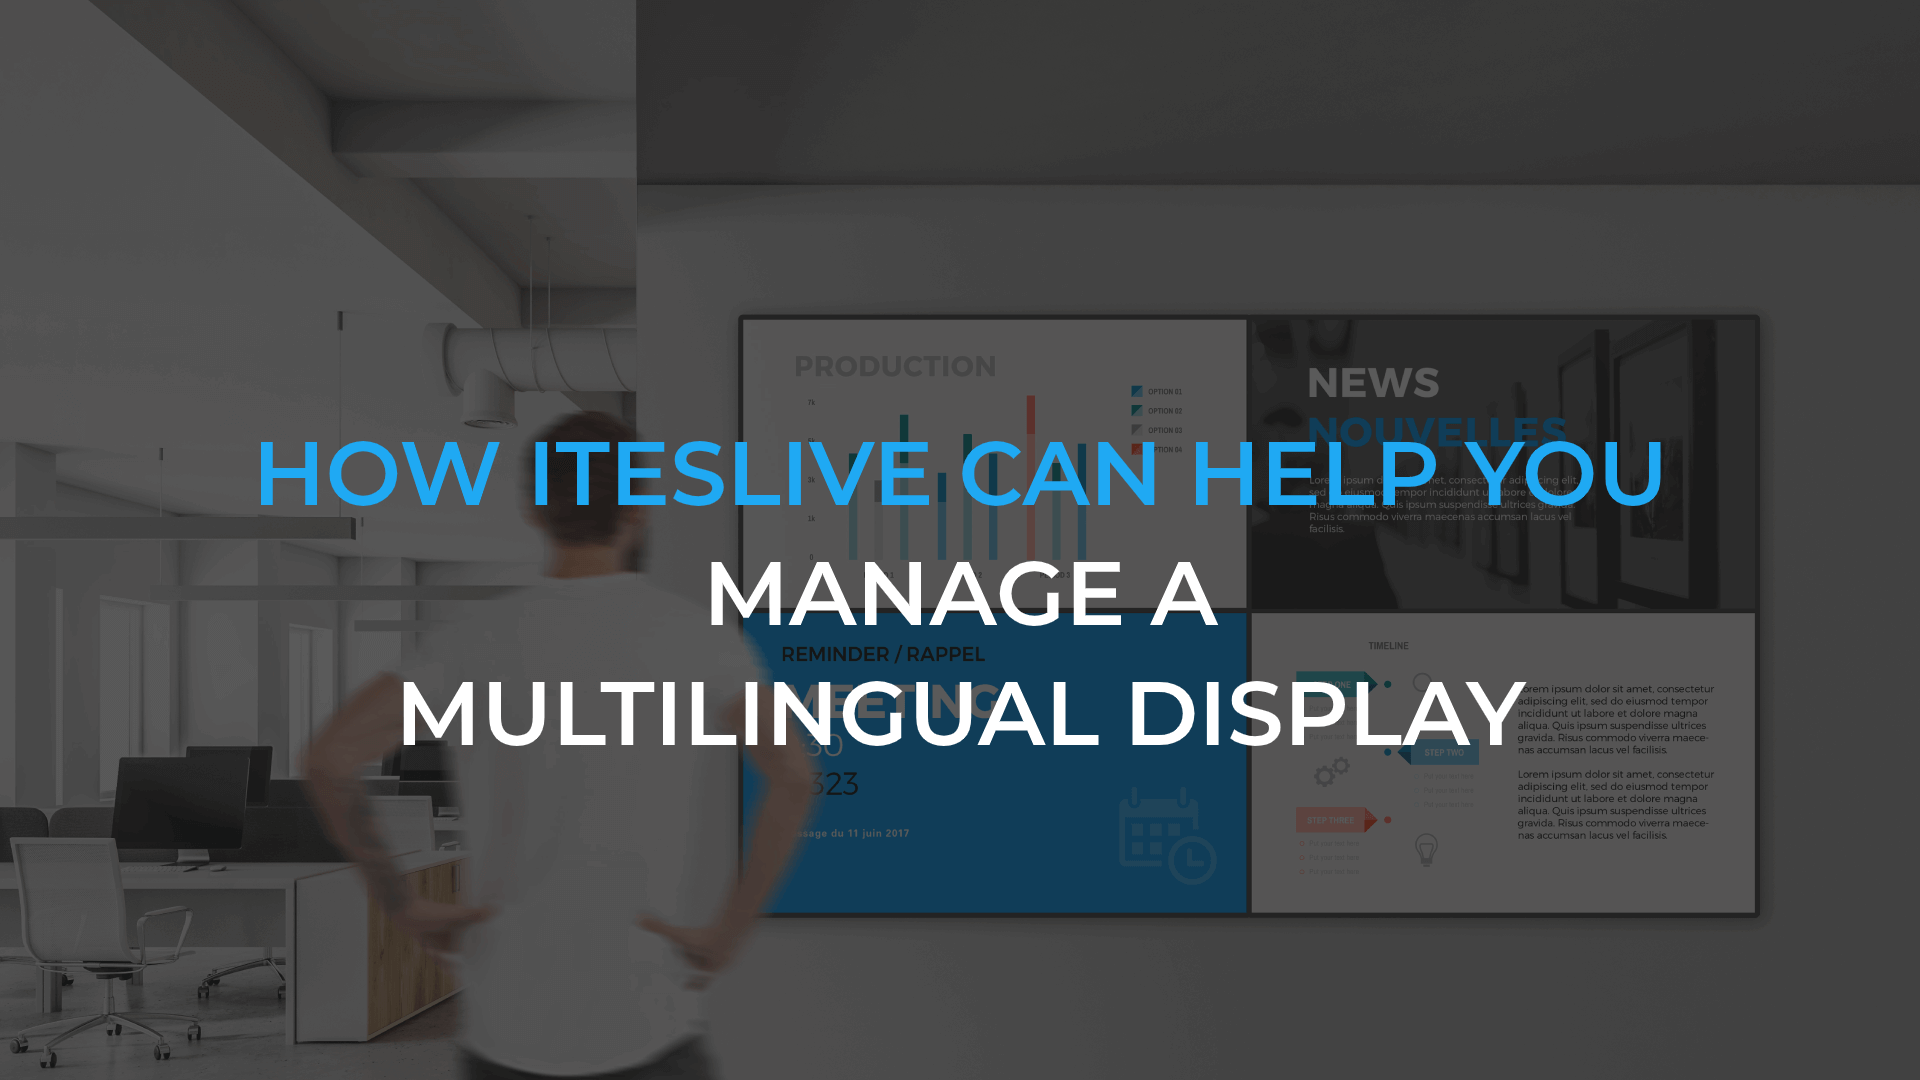 How ITESLIVE can help you manage a multilingual display